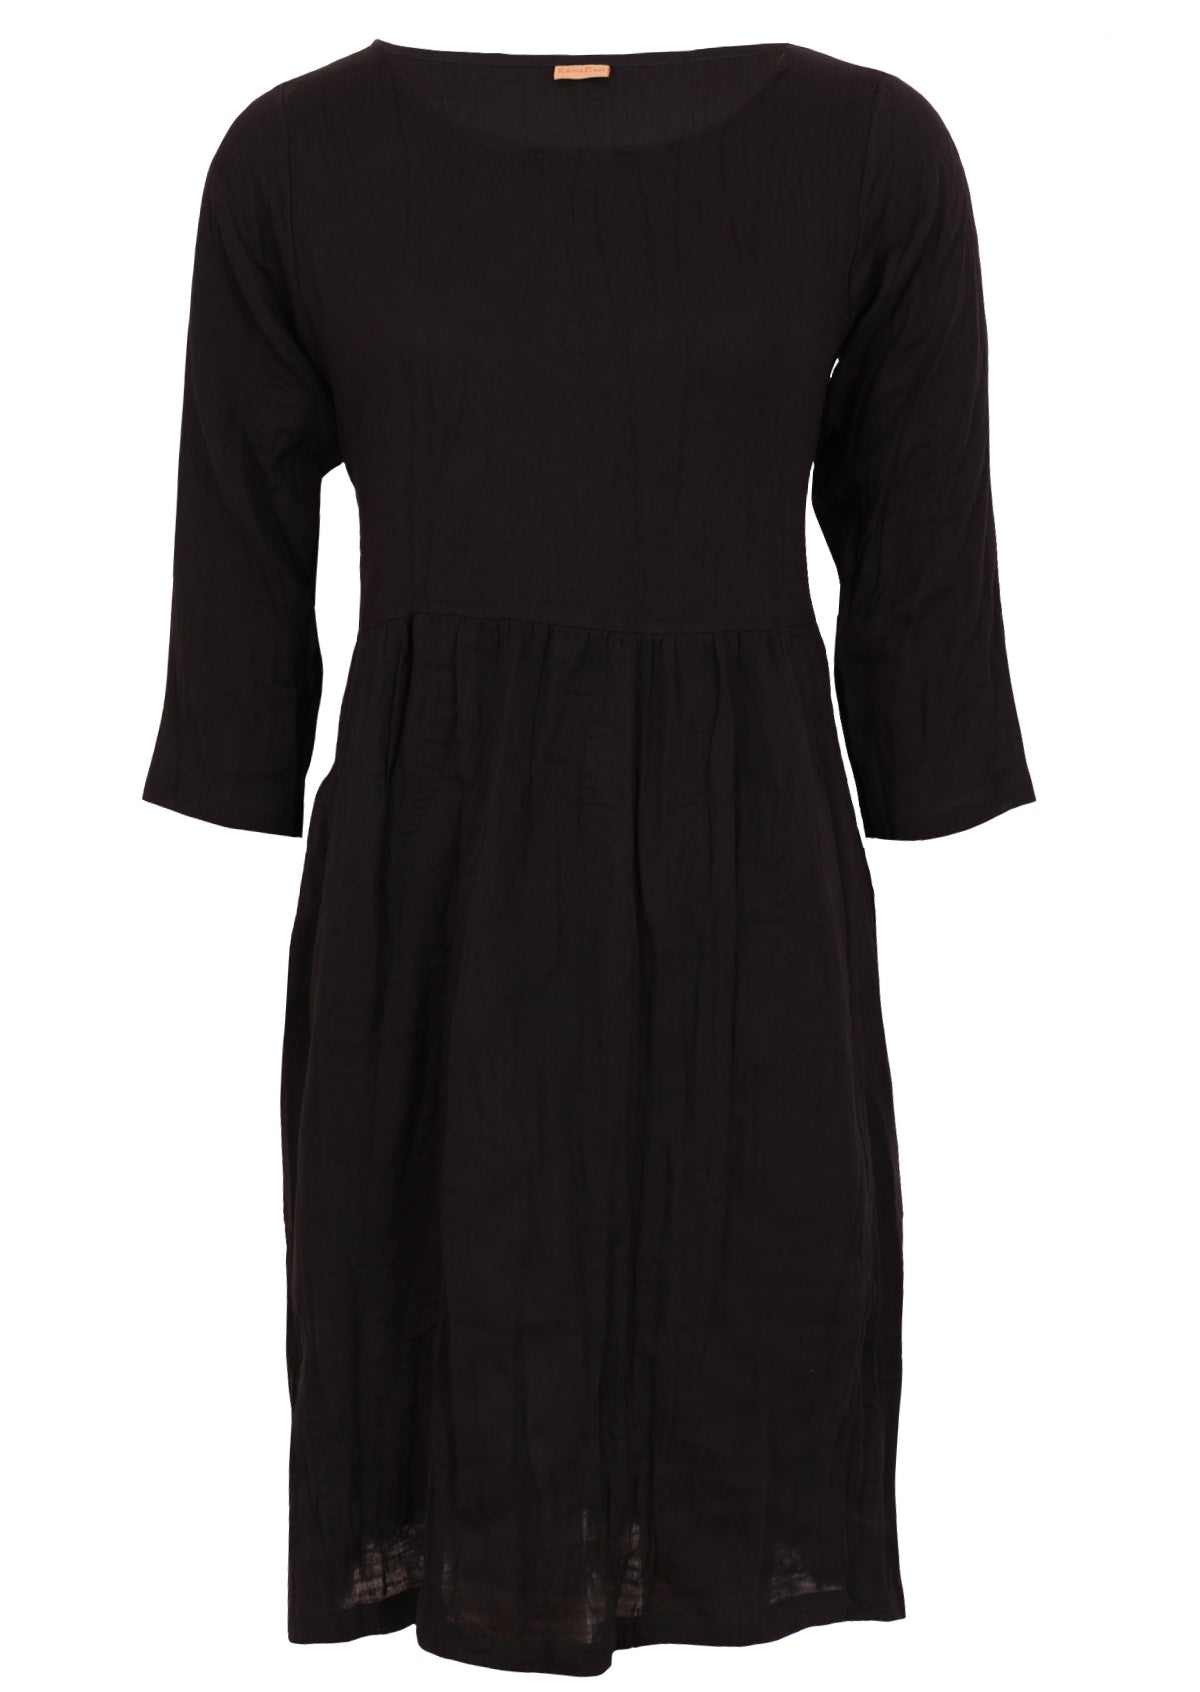 Avery Dress Black front mannequin pic